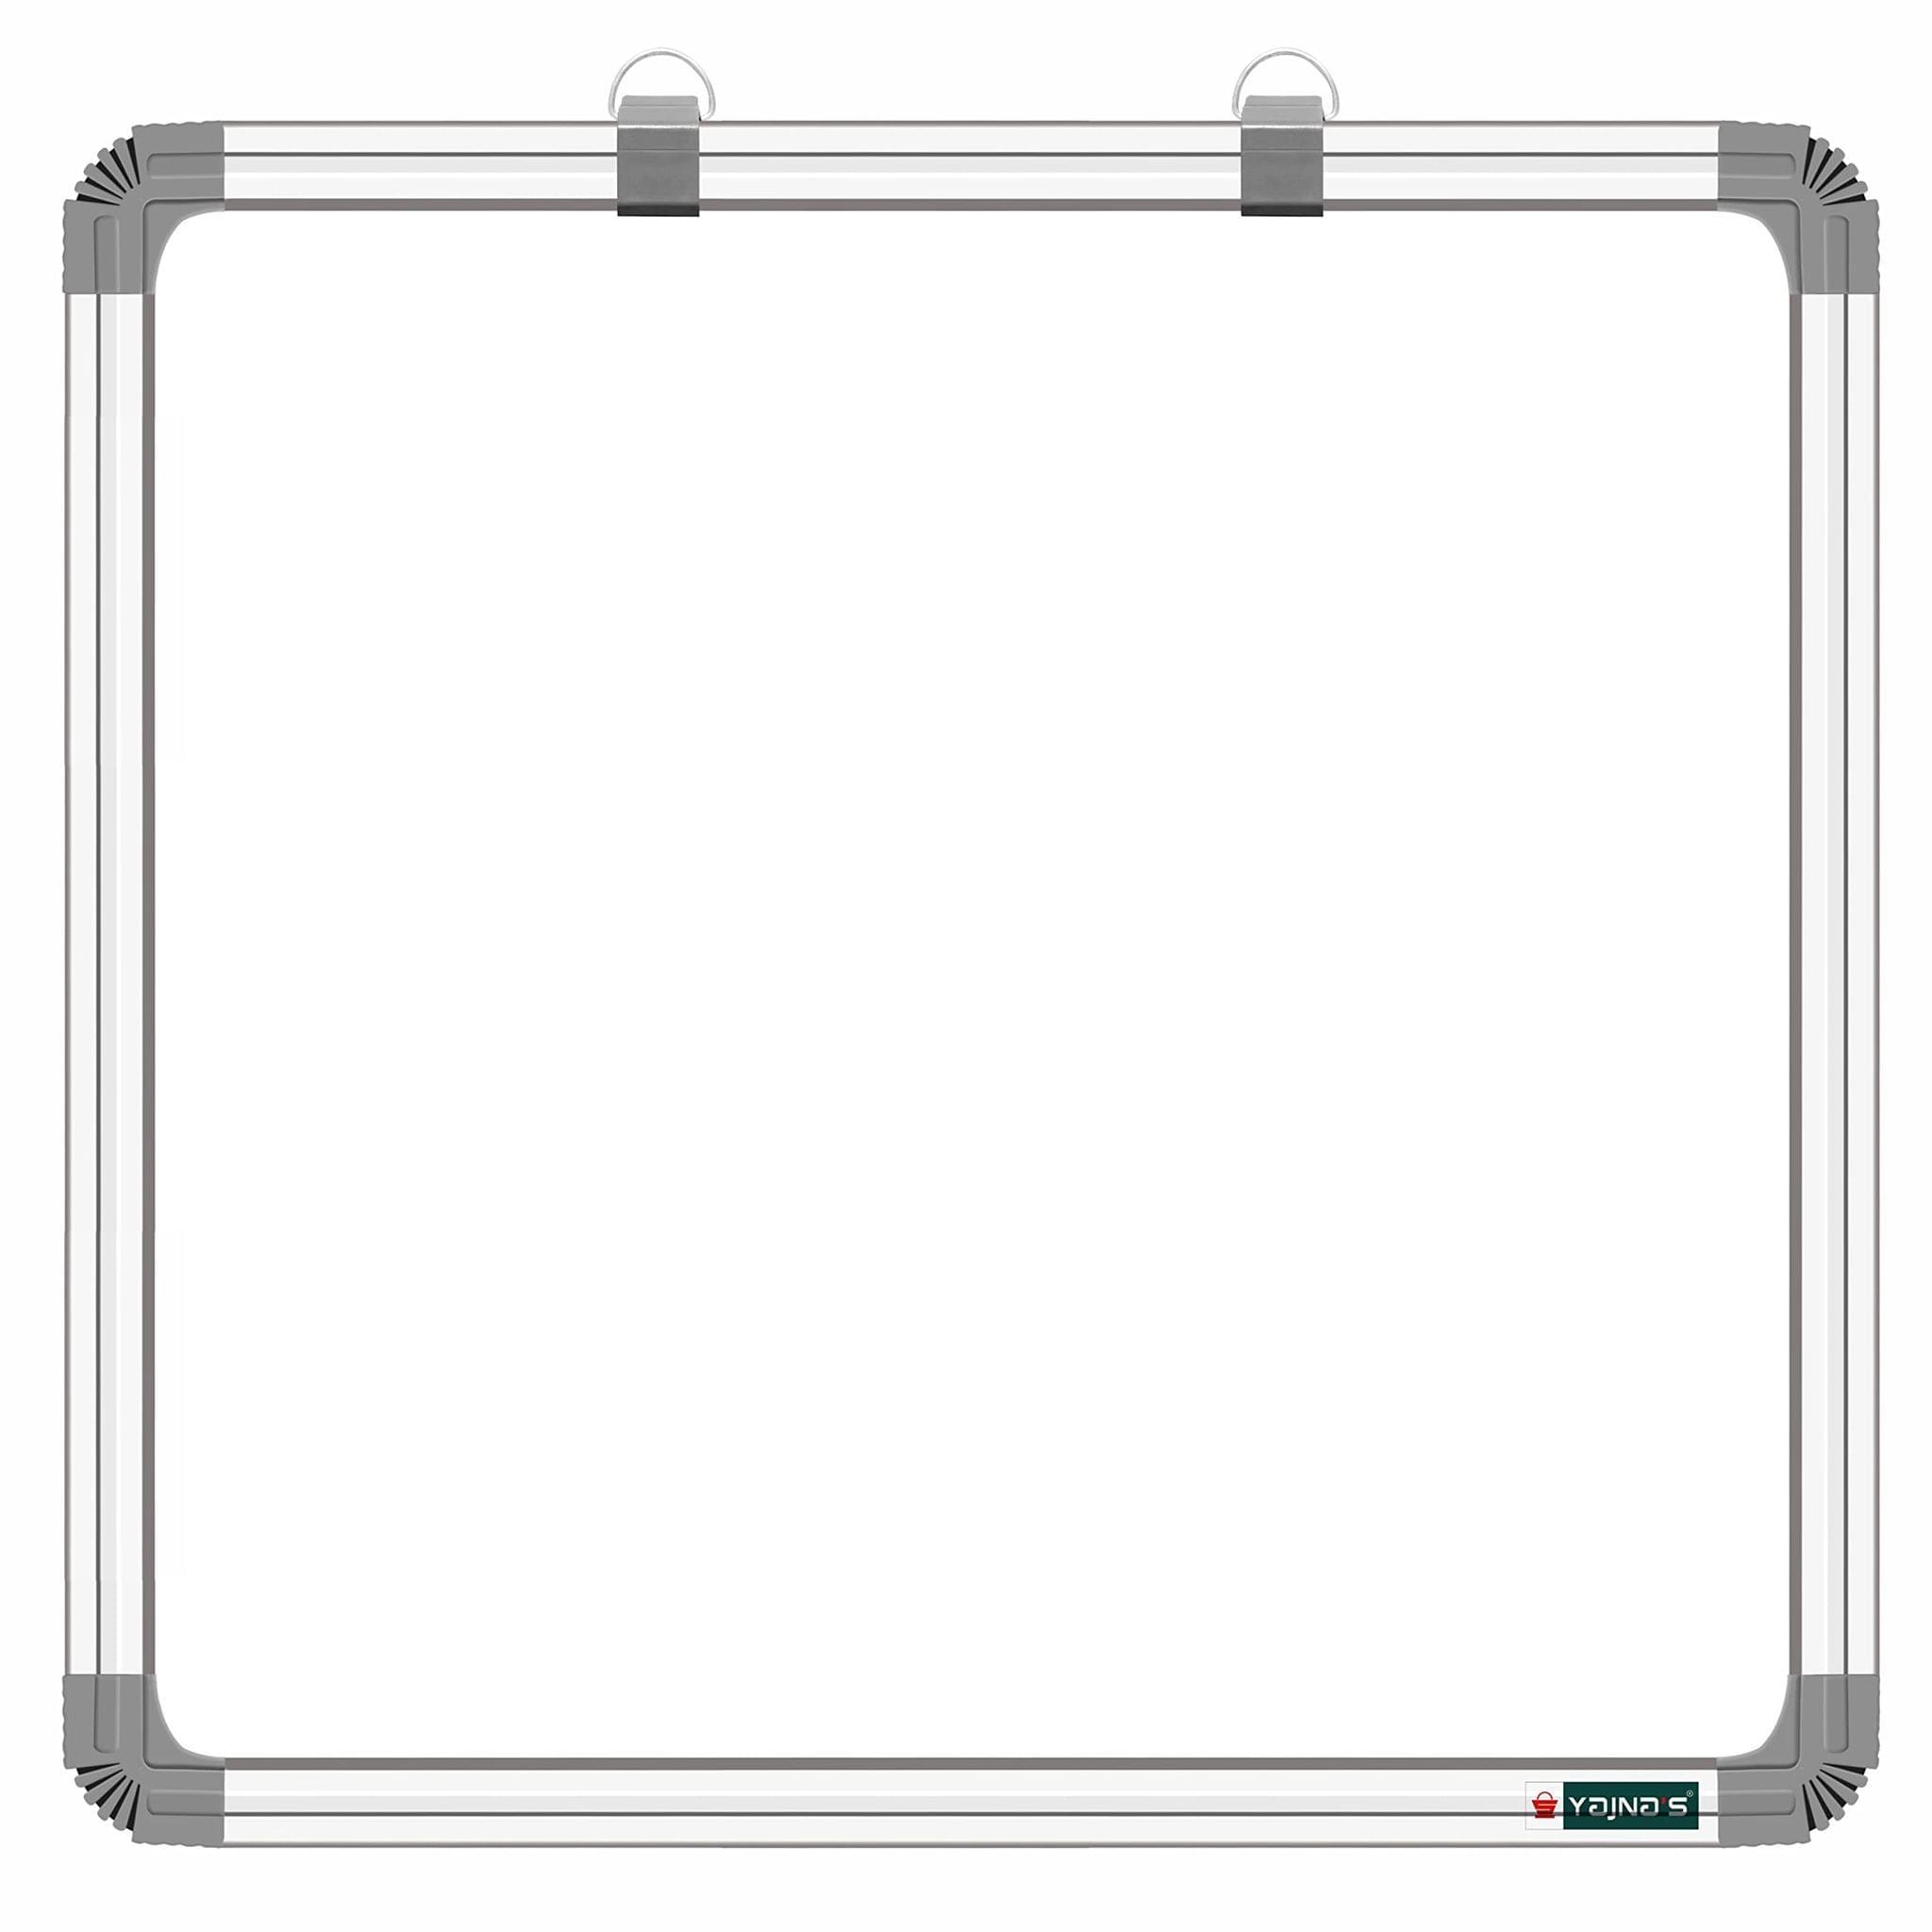 SHELFKING Non-Magnetic 2X2 Feets Double Sided White Board & Chalkboard Both Side Writing Boards, One Side White Marker & Reverse Side Chalkboard Surface - (Pack of 1)